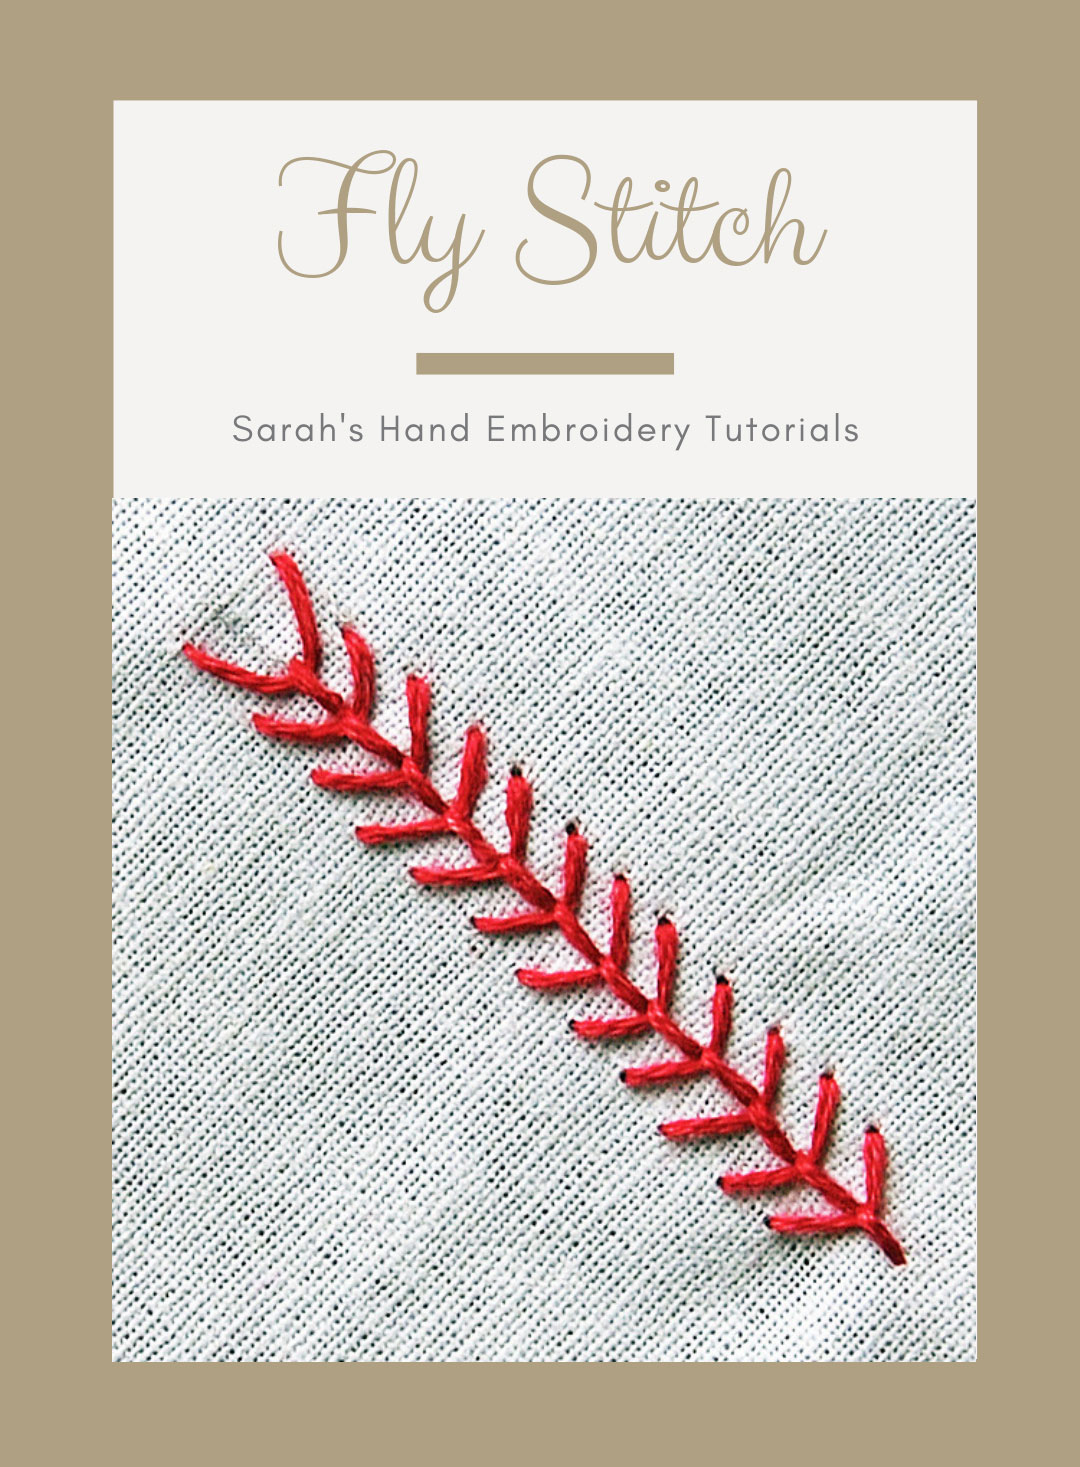 10 Decorative Stitches - Embroidery Learning Tutorials for Beginners 